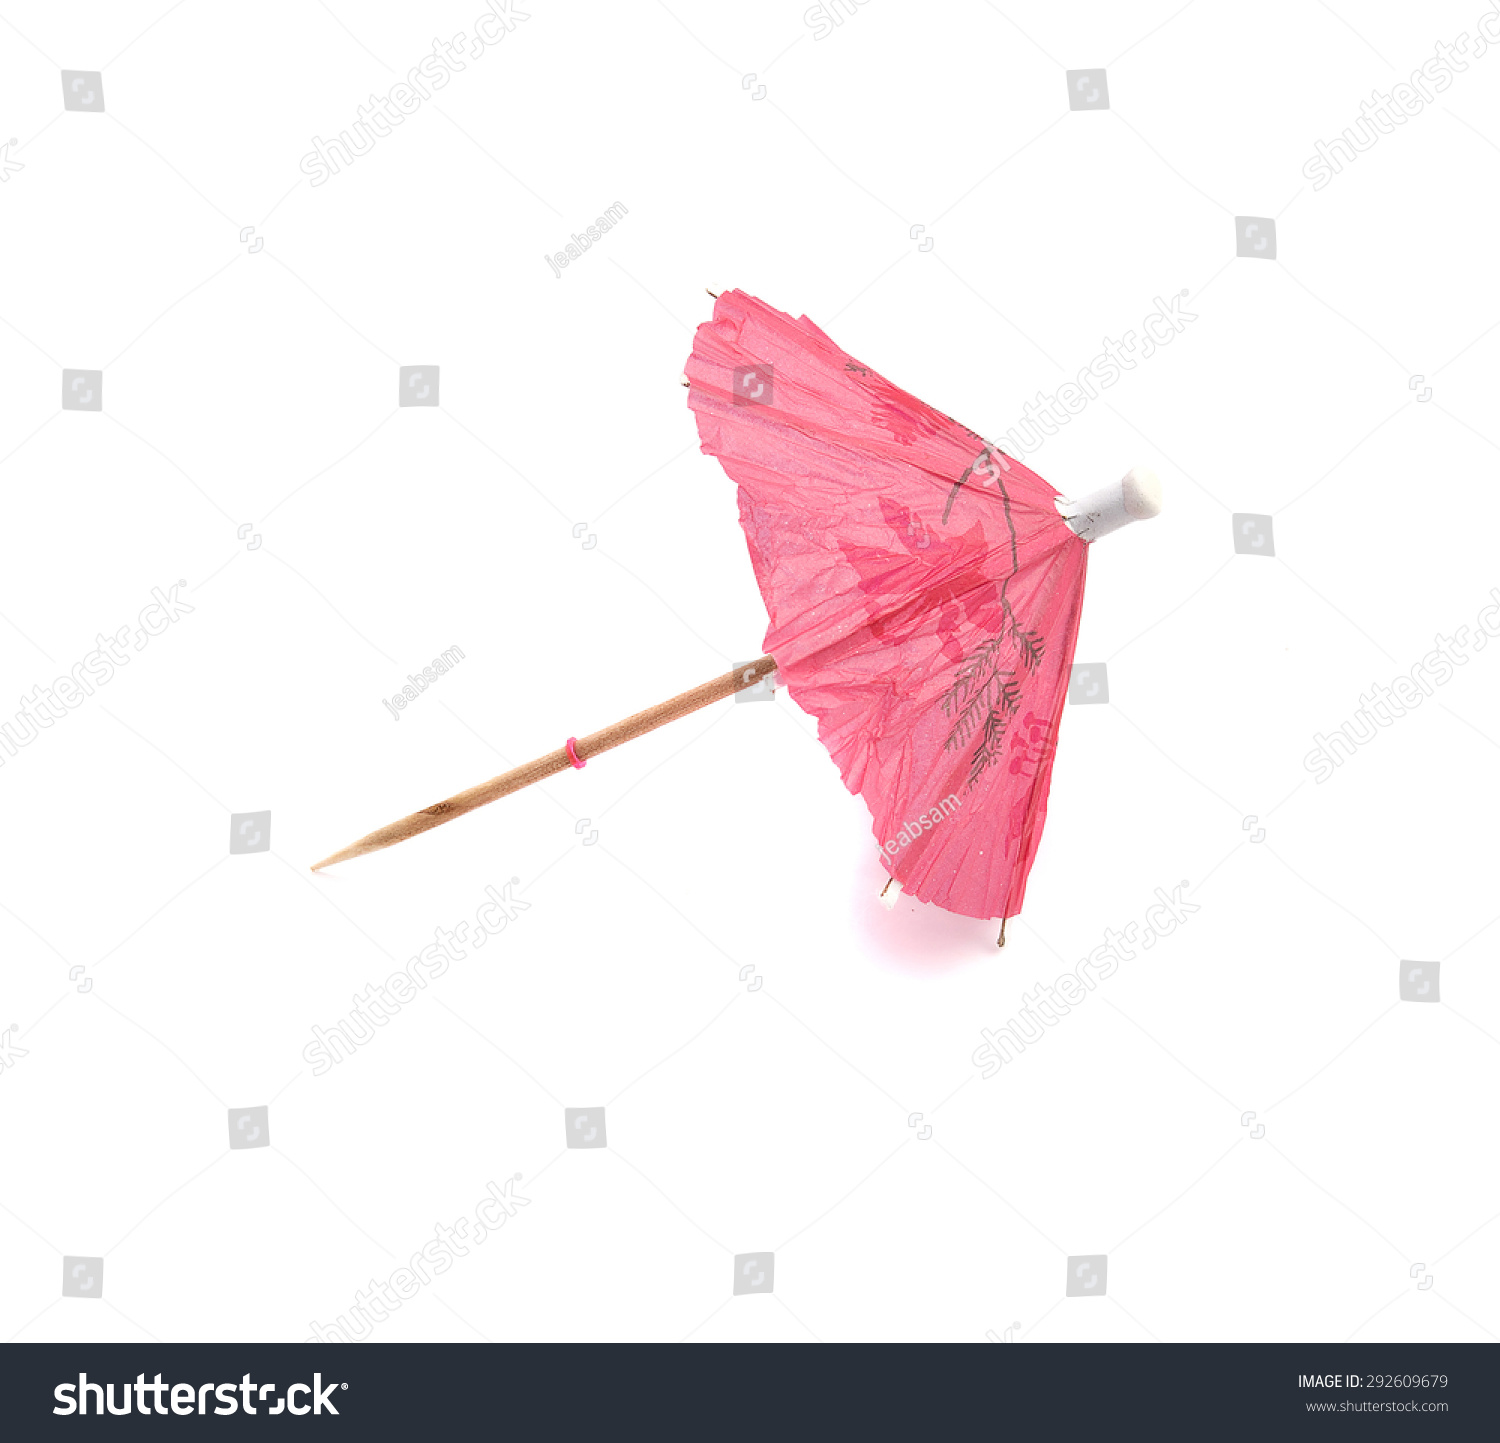 Pink Cocktail Umbrella Isolated On White Stock Photo 292609679 ...